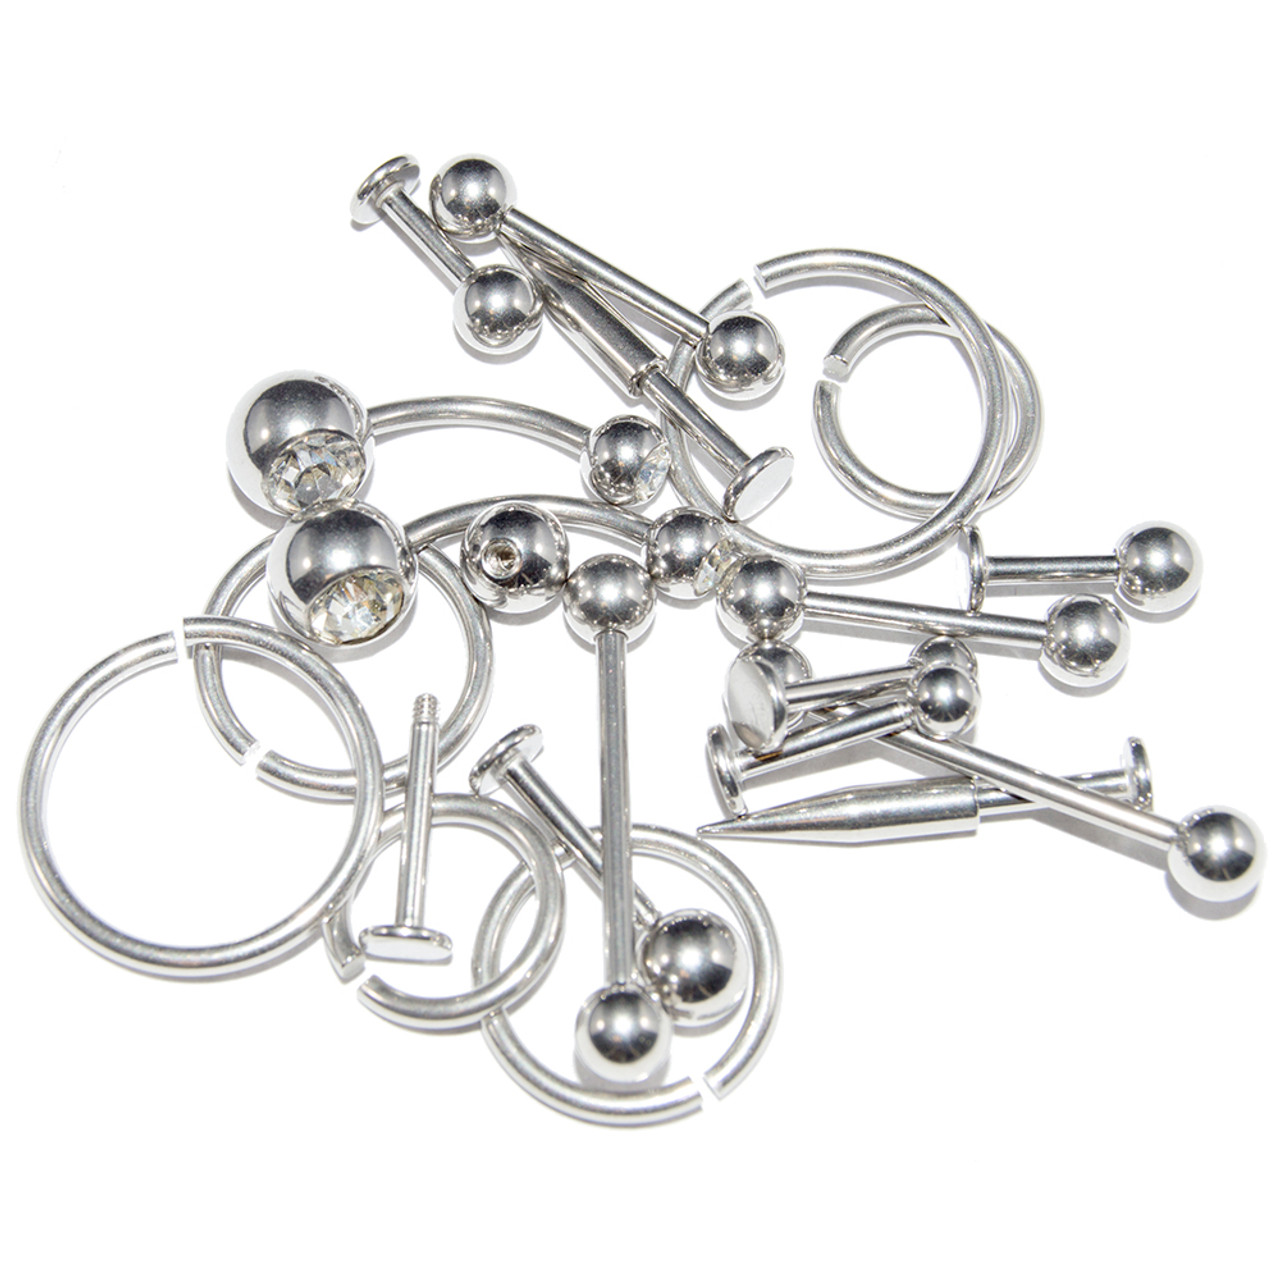 Wholesale Lot of 20 Basic 14G Body Jewelry Surgical Steel